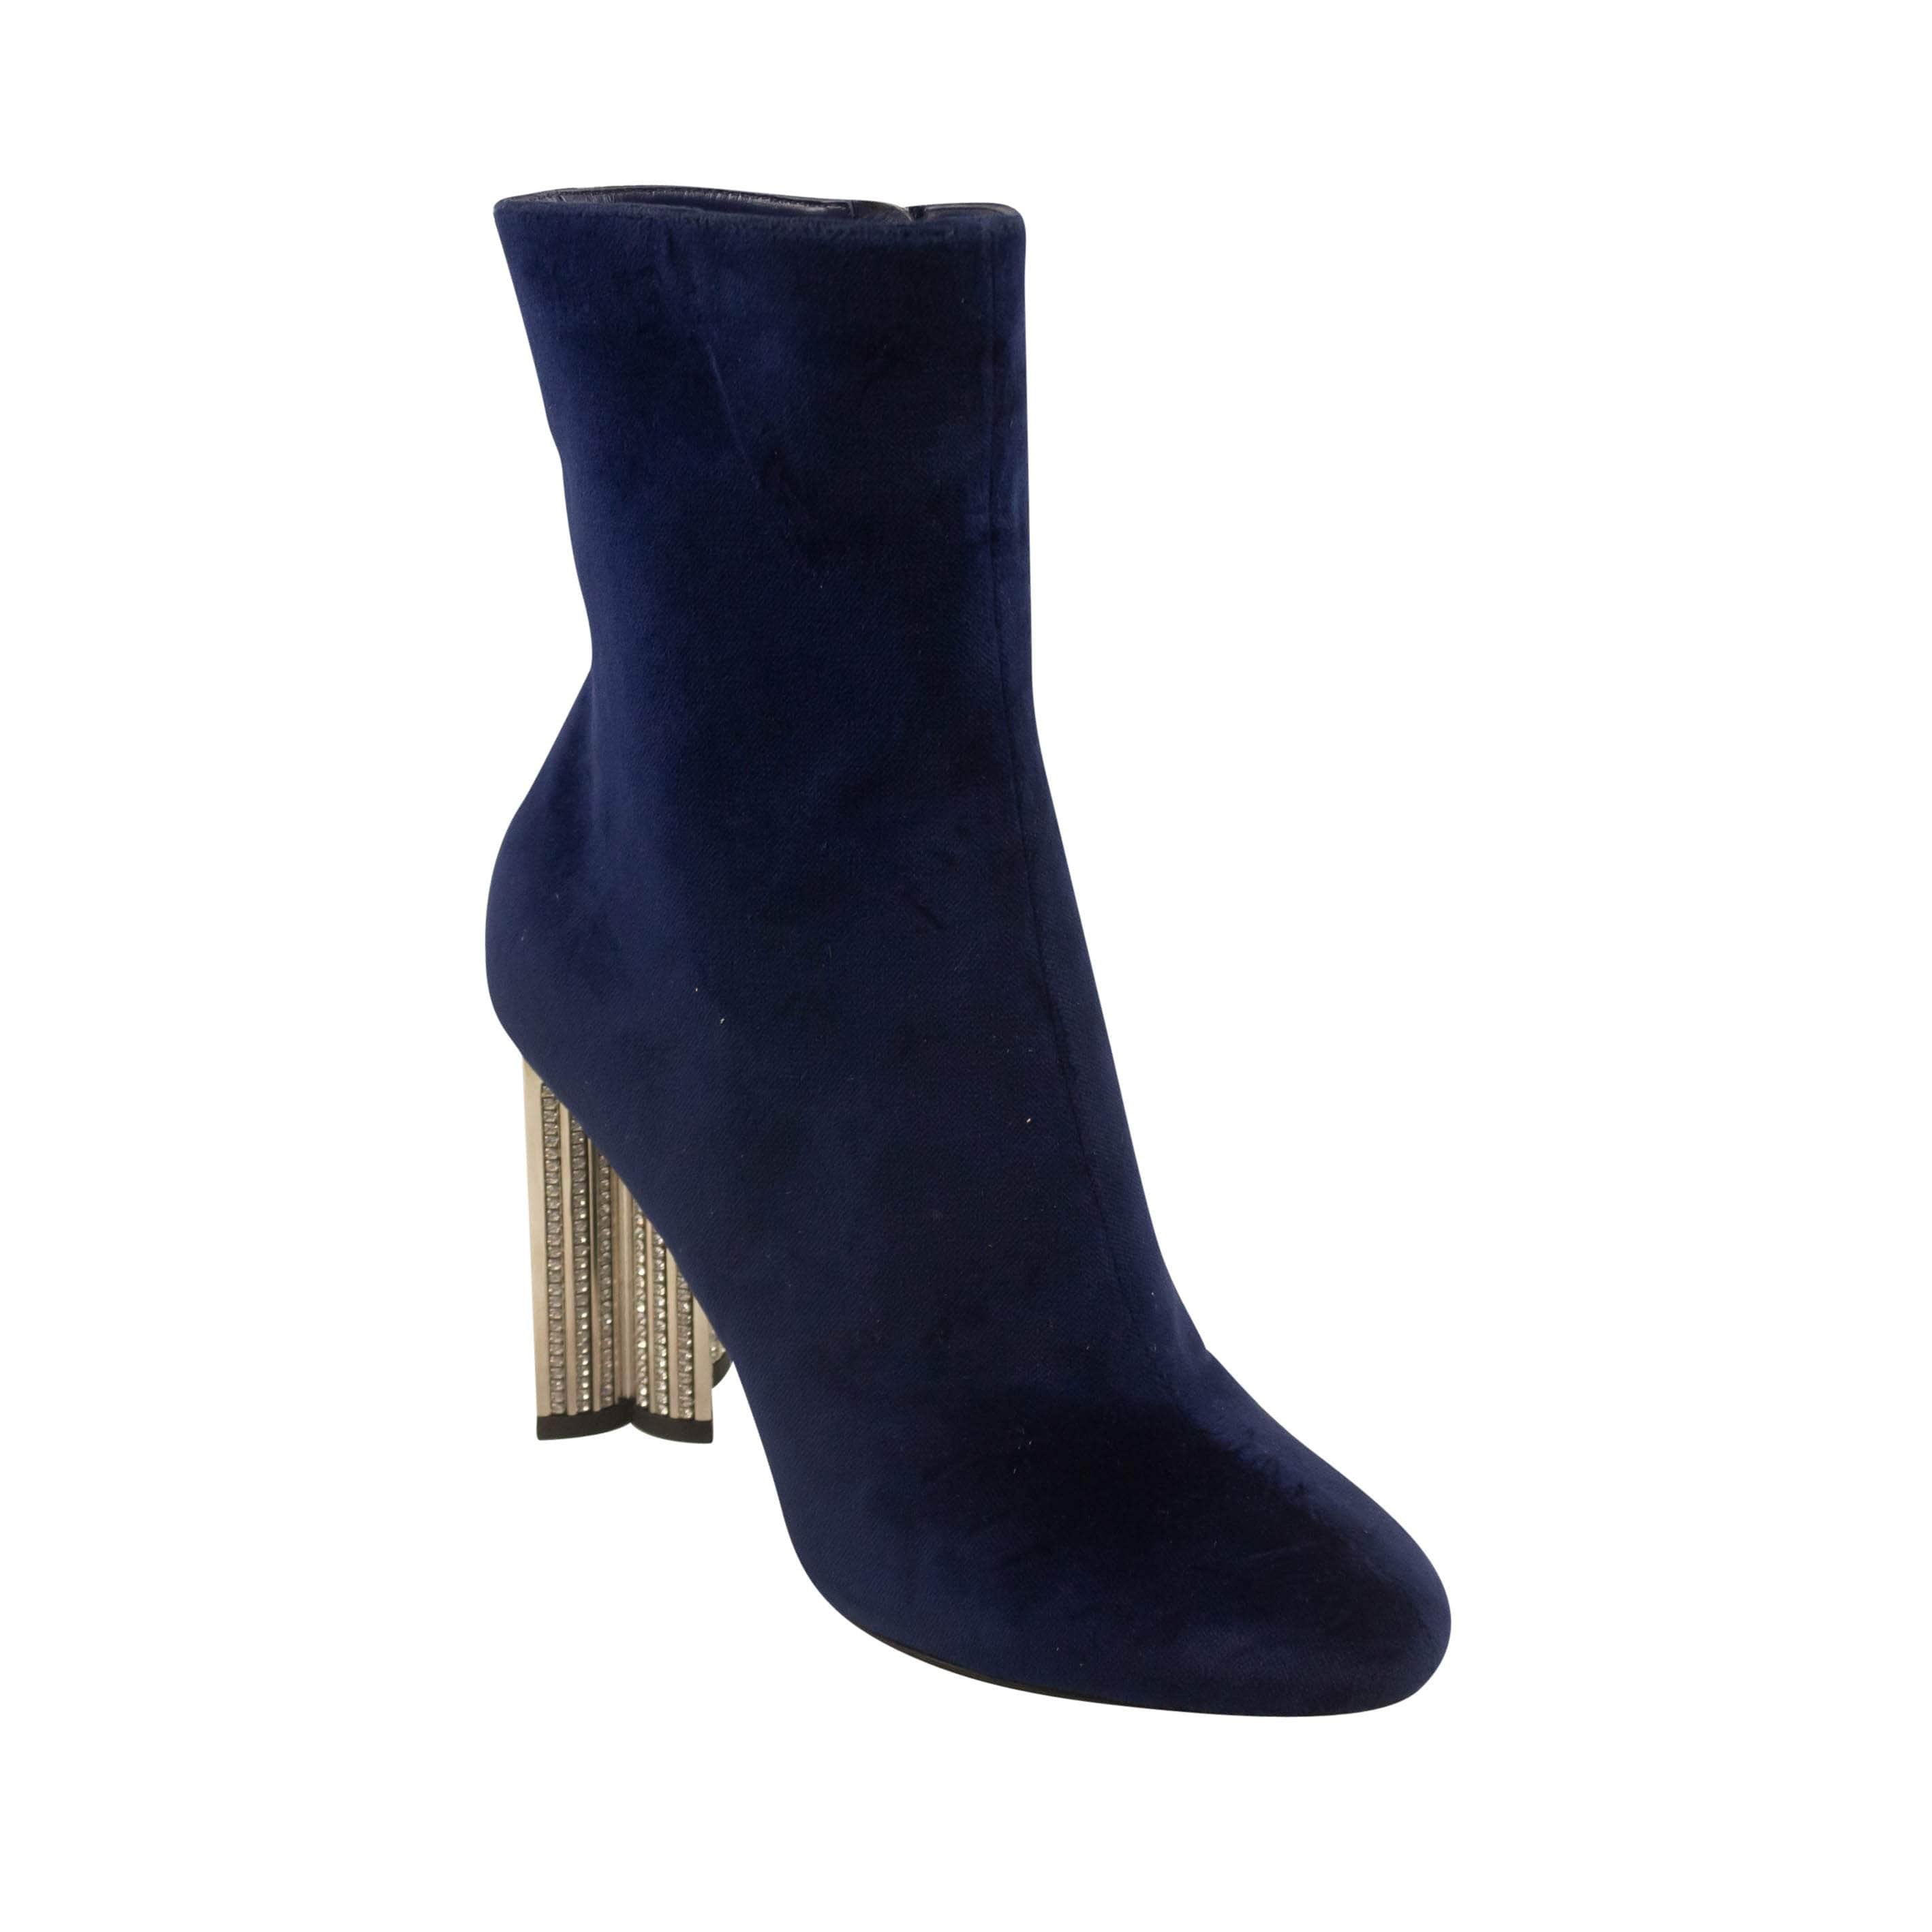 Louis Vuitton 750-1000, channelenable-all, chicmi, couponcollection, gender-womens, main-shoes, size-37, SPO, stadiumgoods, womens-ankle-boots 37 Blue Silhouette Rhinestone Heel Ankle Boots 95-LVT-2025/37 95-LVT-2025/37